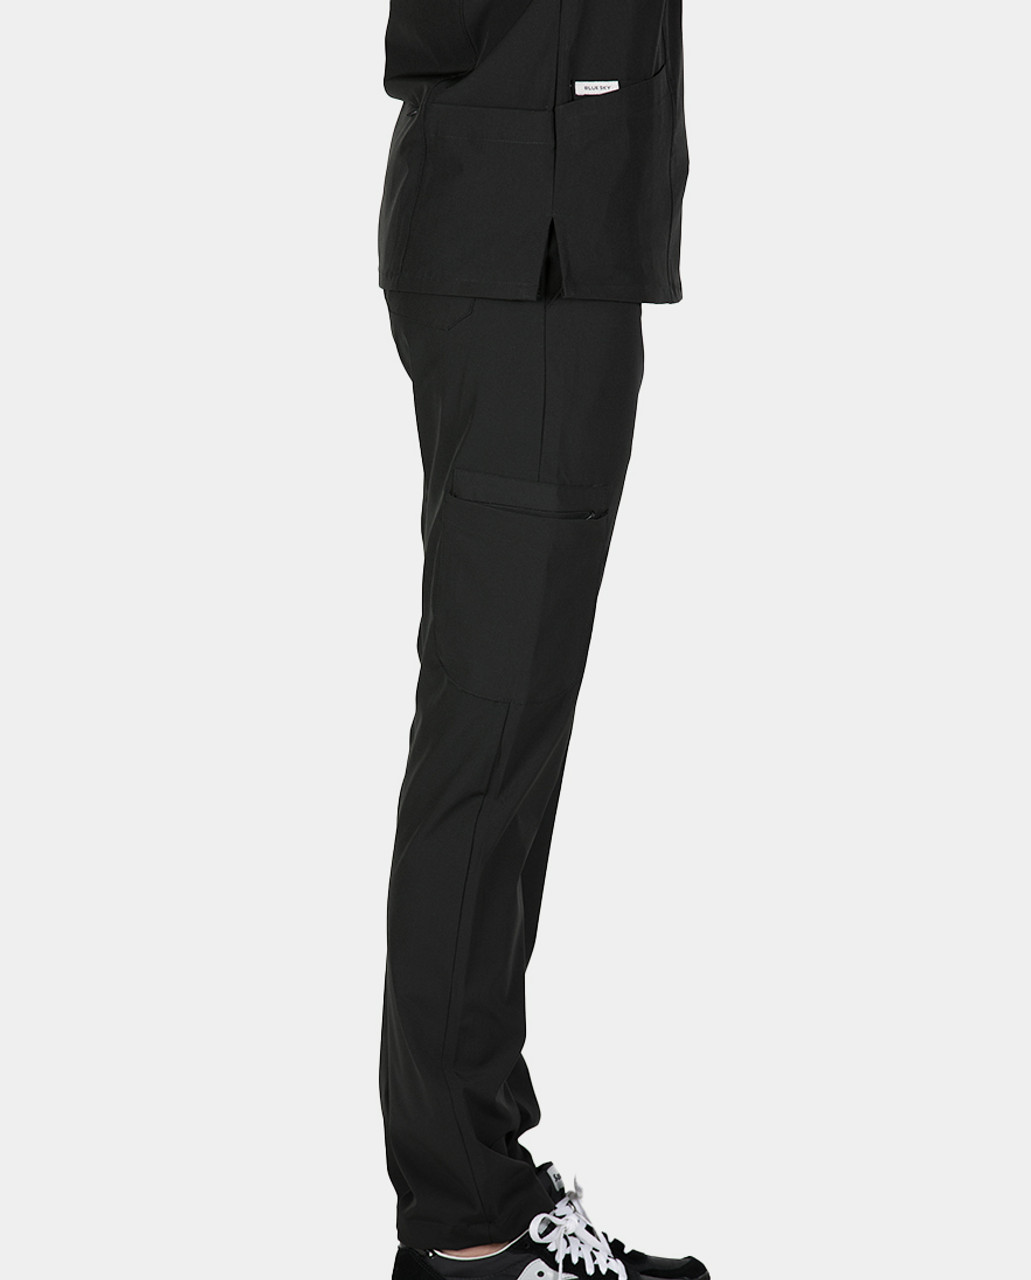 Buy FOREVER NEW Black Solid Polyester Tapered Fit Women's Formal Pants